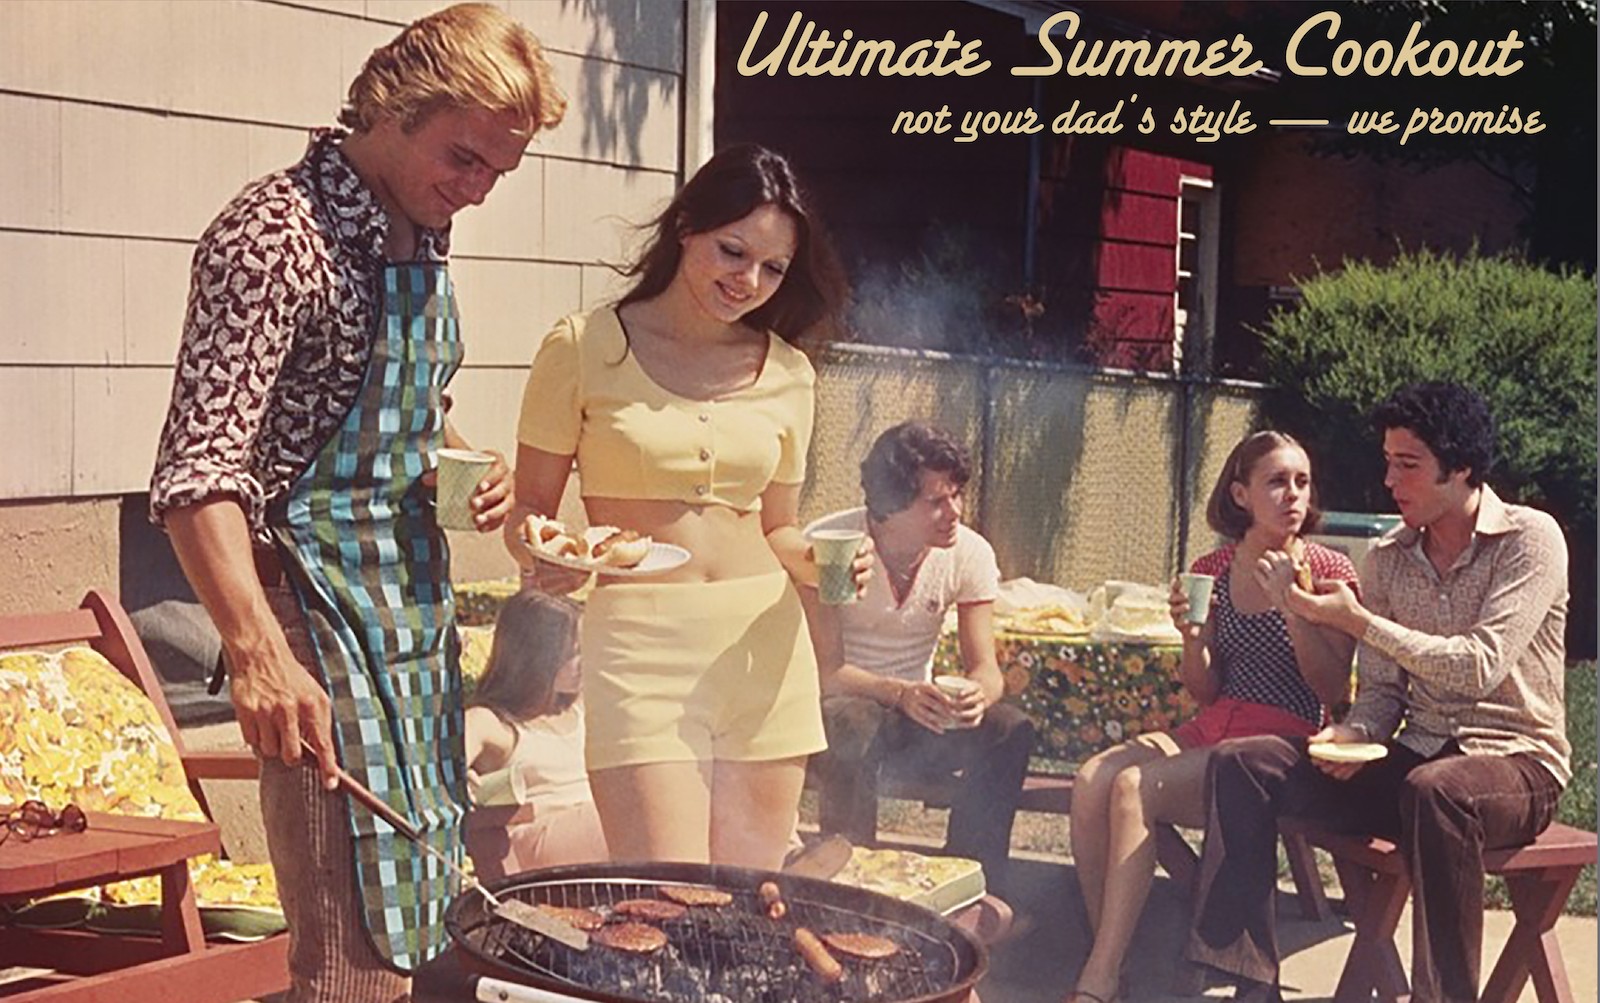 Ultimate Summer Cookout Tickets